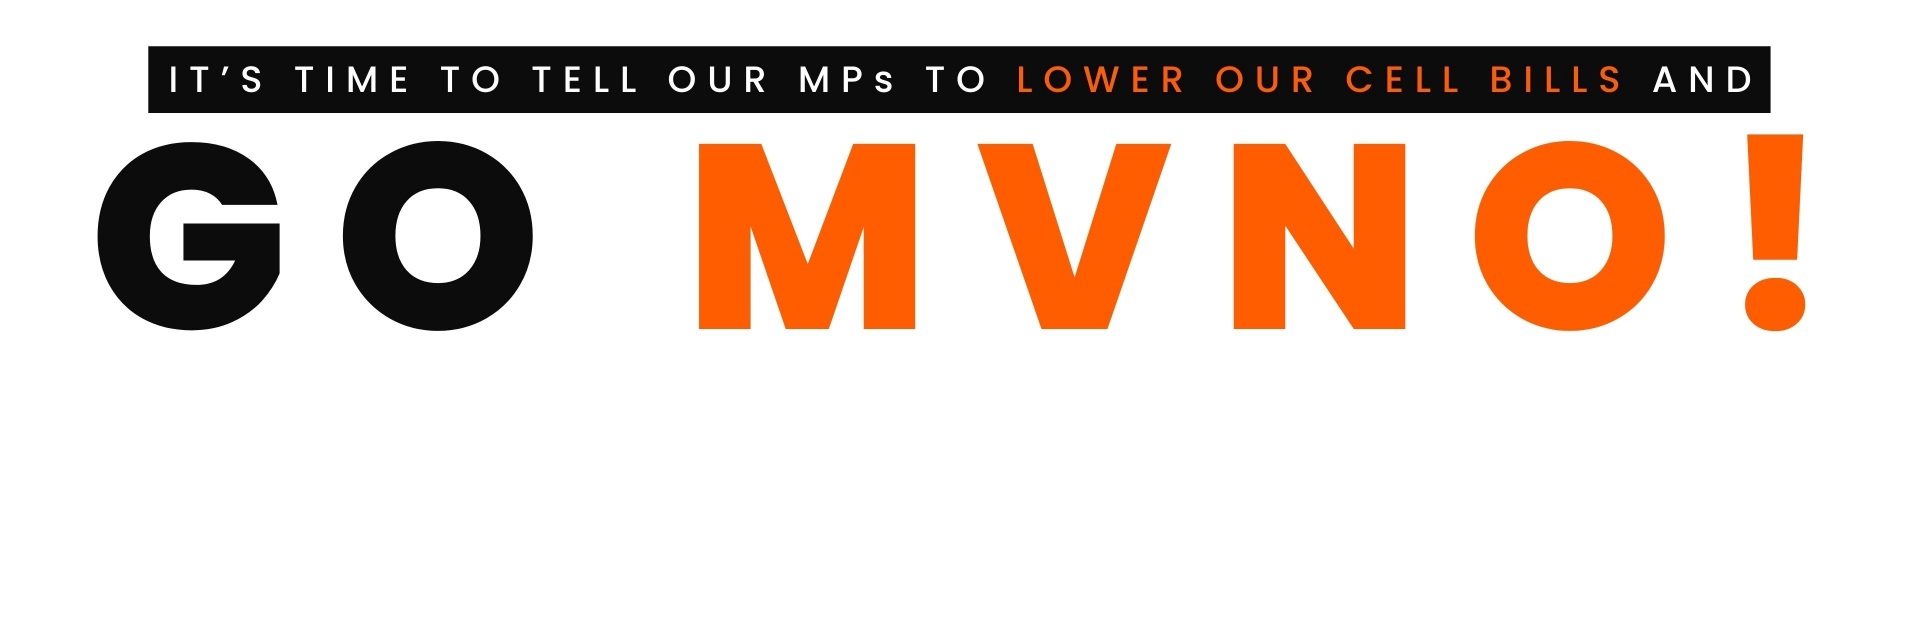 Tell MPs: For low cell phone prices, go MVNO!